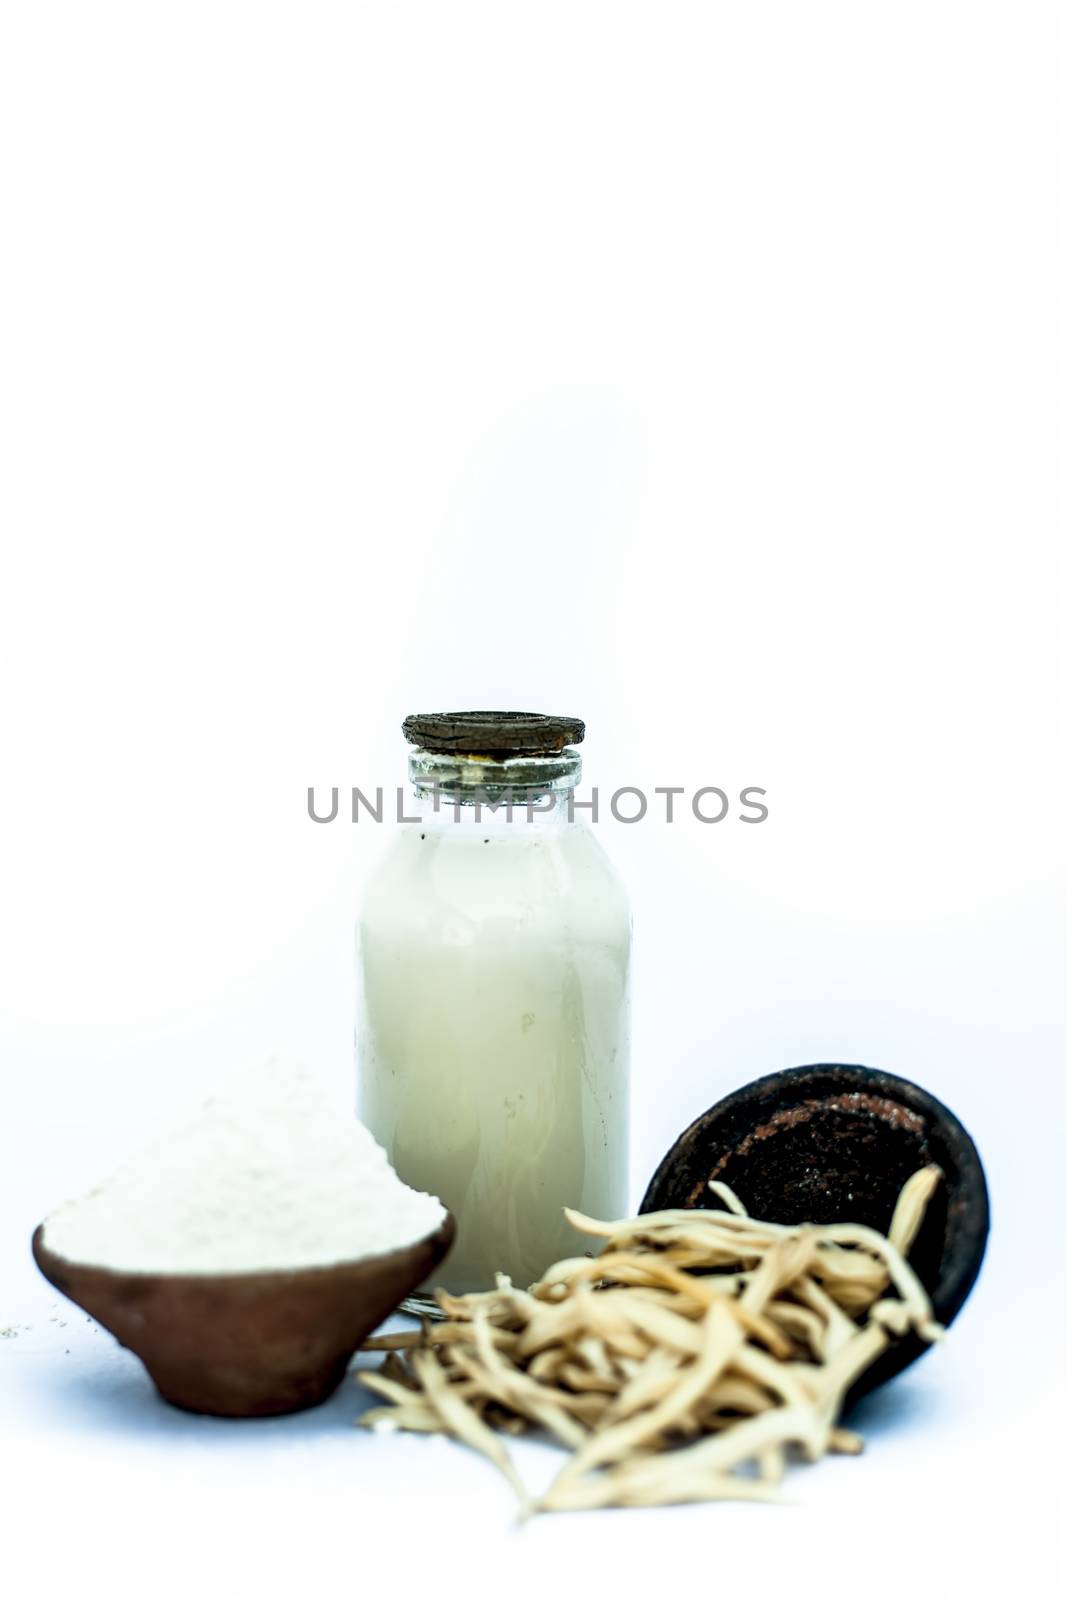 Popular Indian & Asian ayurvedic herb isolated on white in a clay bowl i.e. Musli or safed musli or Chlorophytum borivilianum with its powder in a clay bowl and raw milk in a transparent glass bottle.